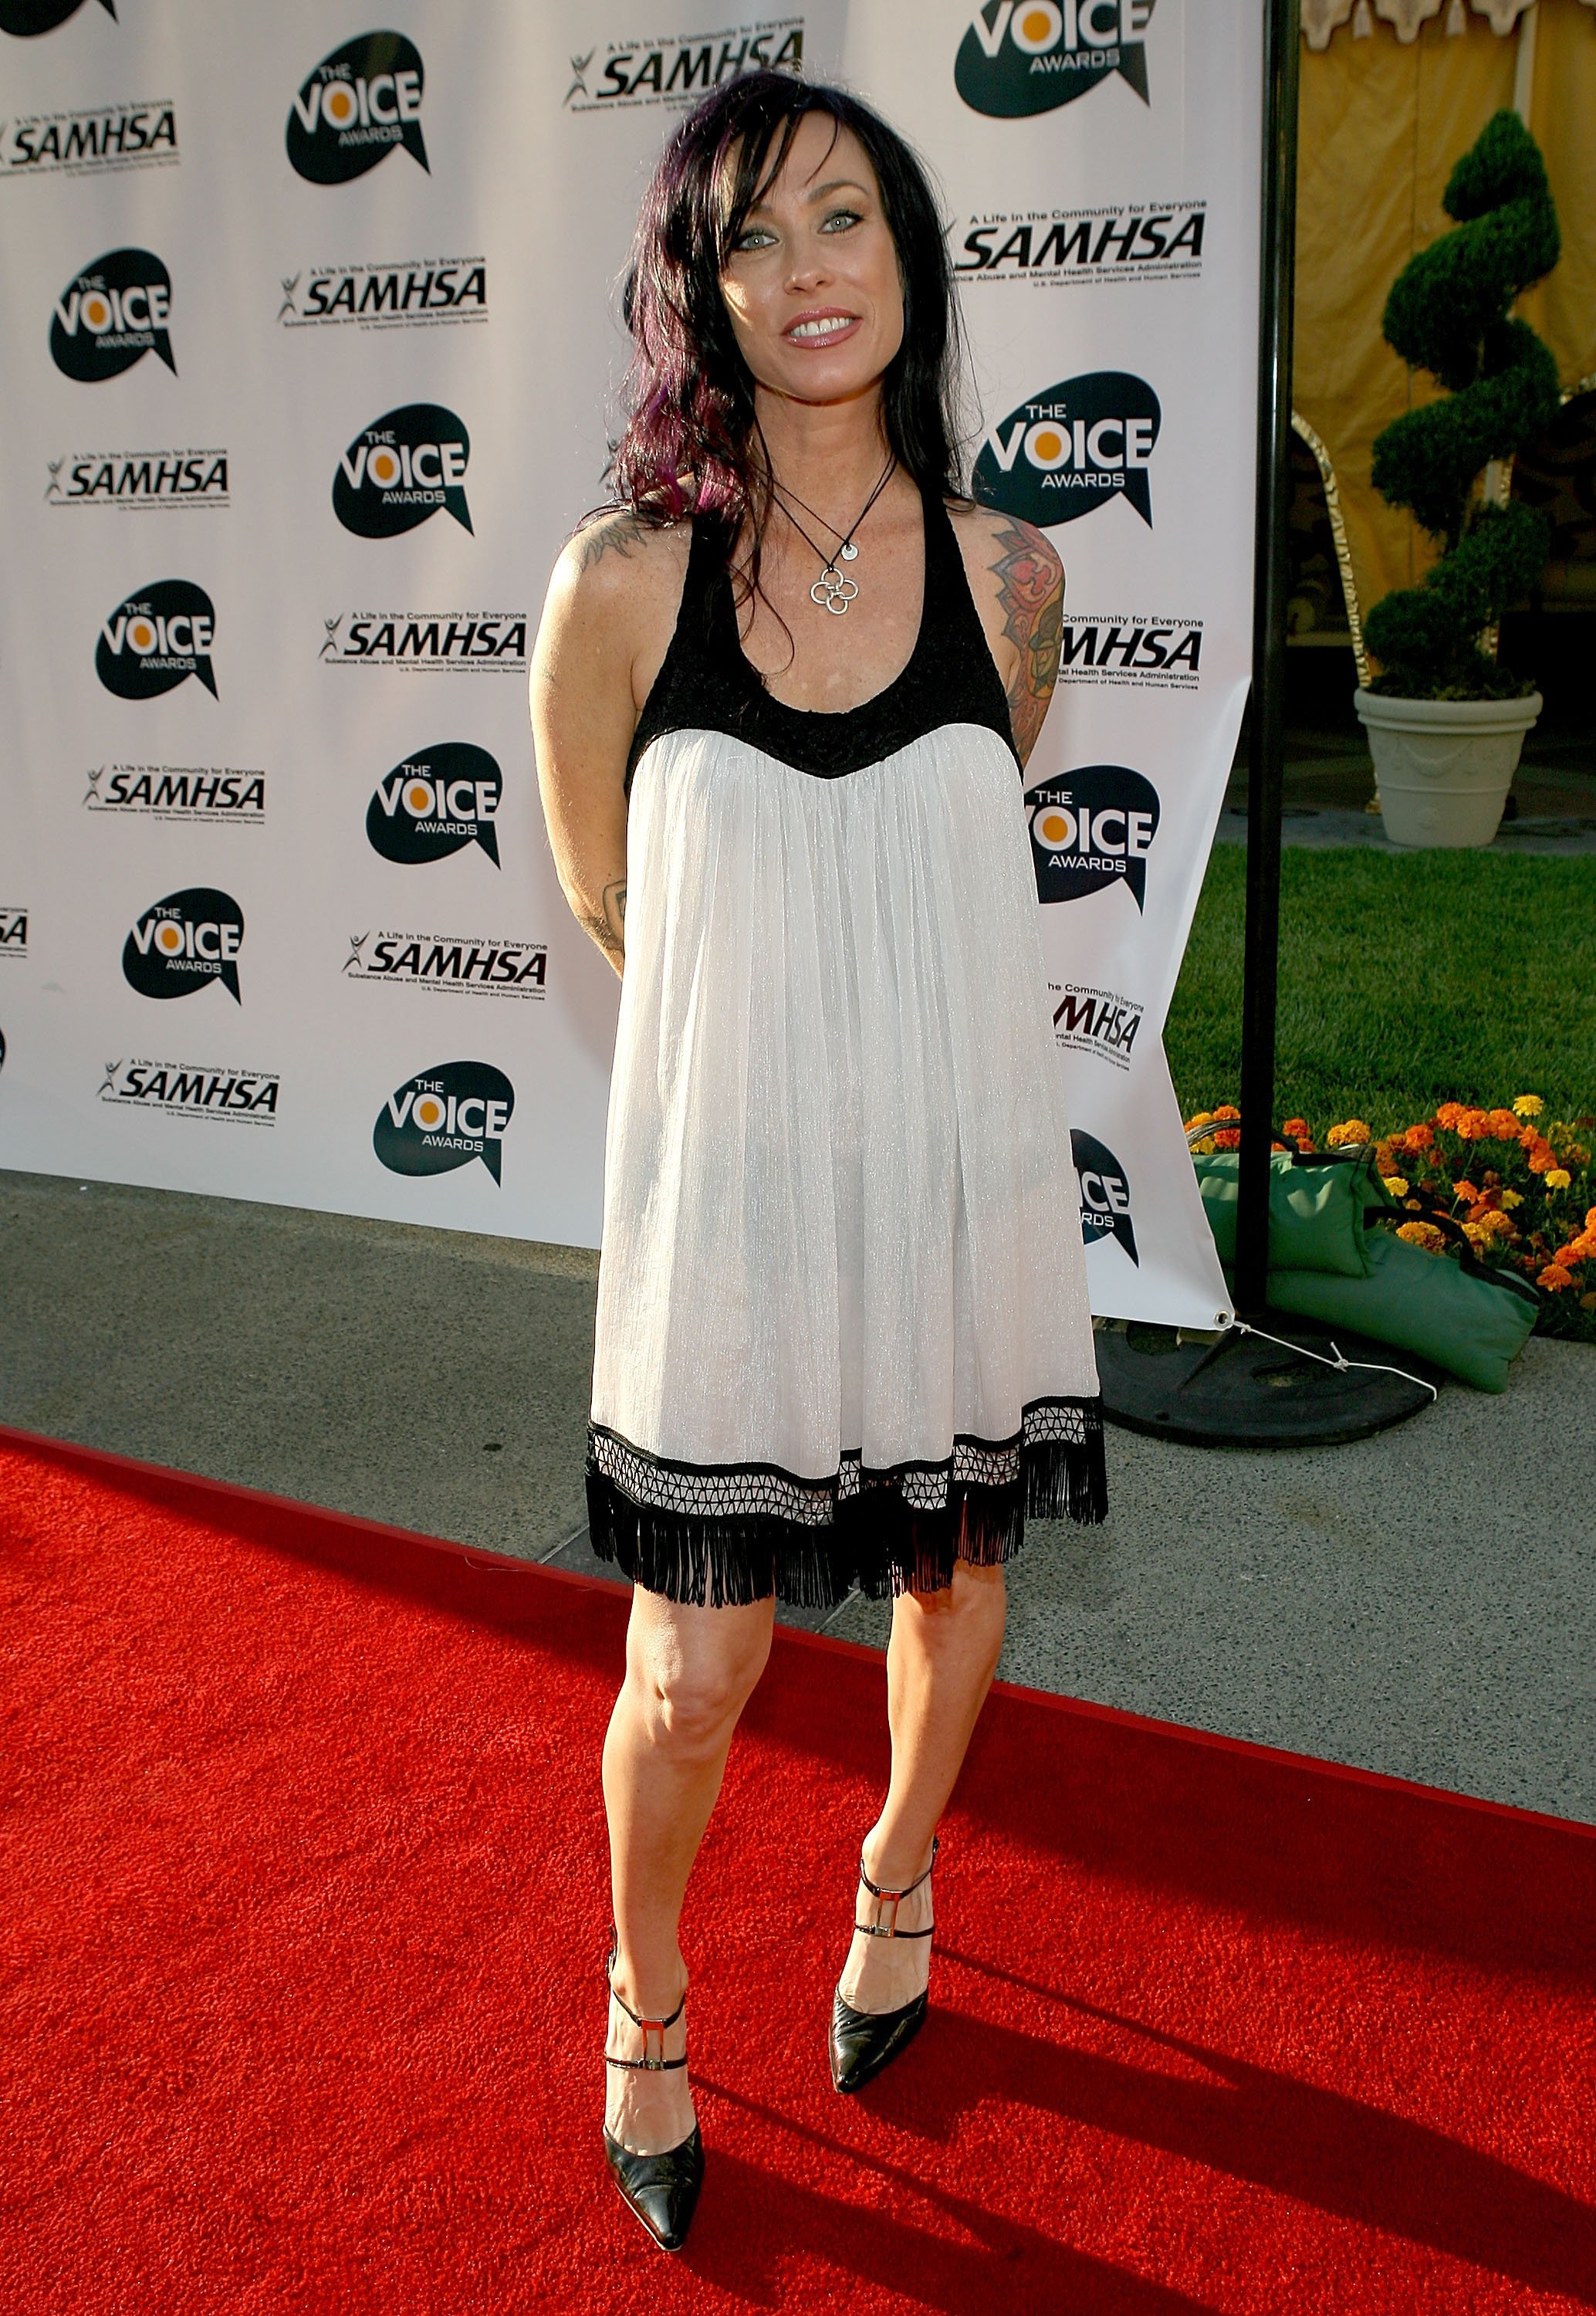 Erin Hamilton arrives at the 2008 Voice Awards on May 28, 2008 at the Paramount Theater in Hollywood, California. | Source: Getty Images